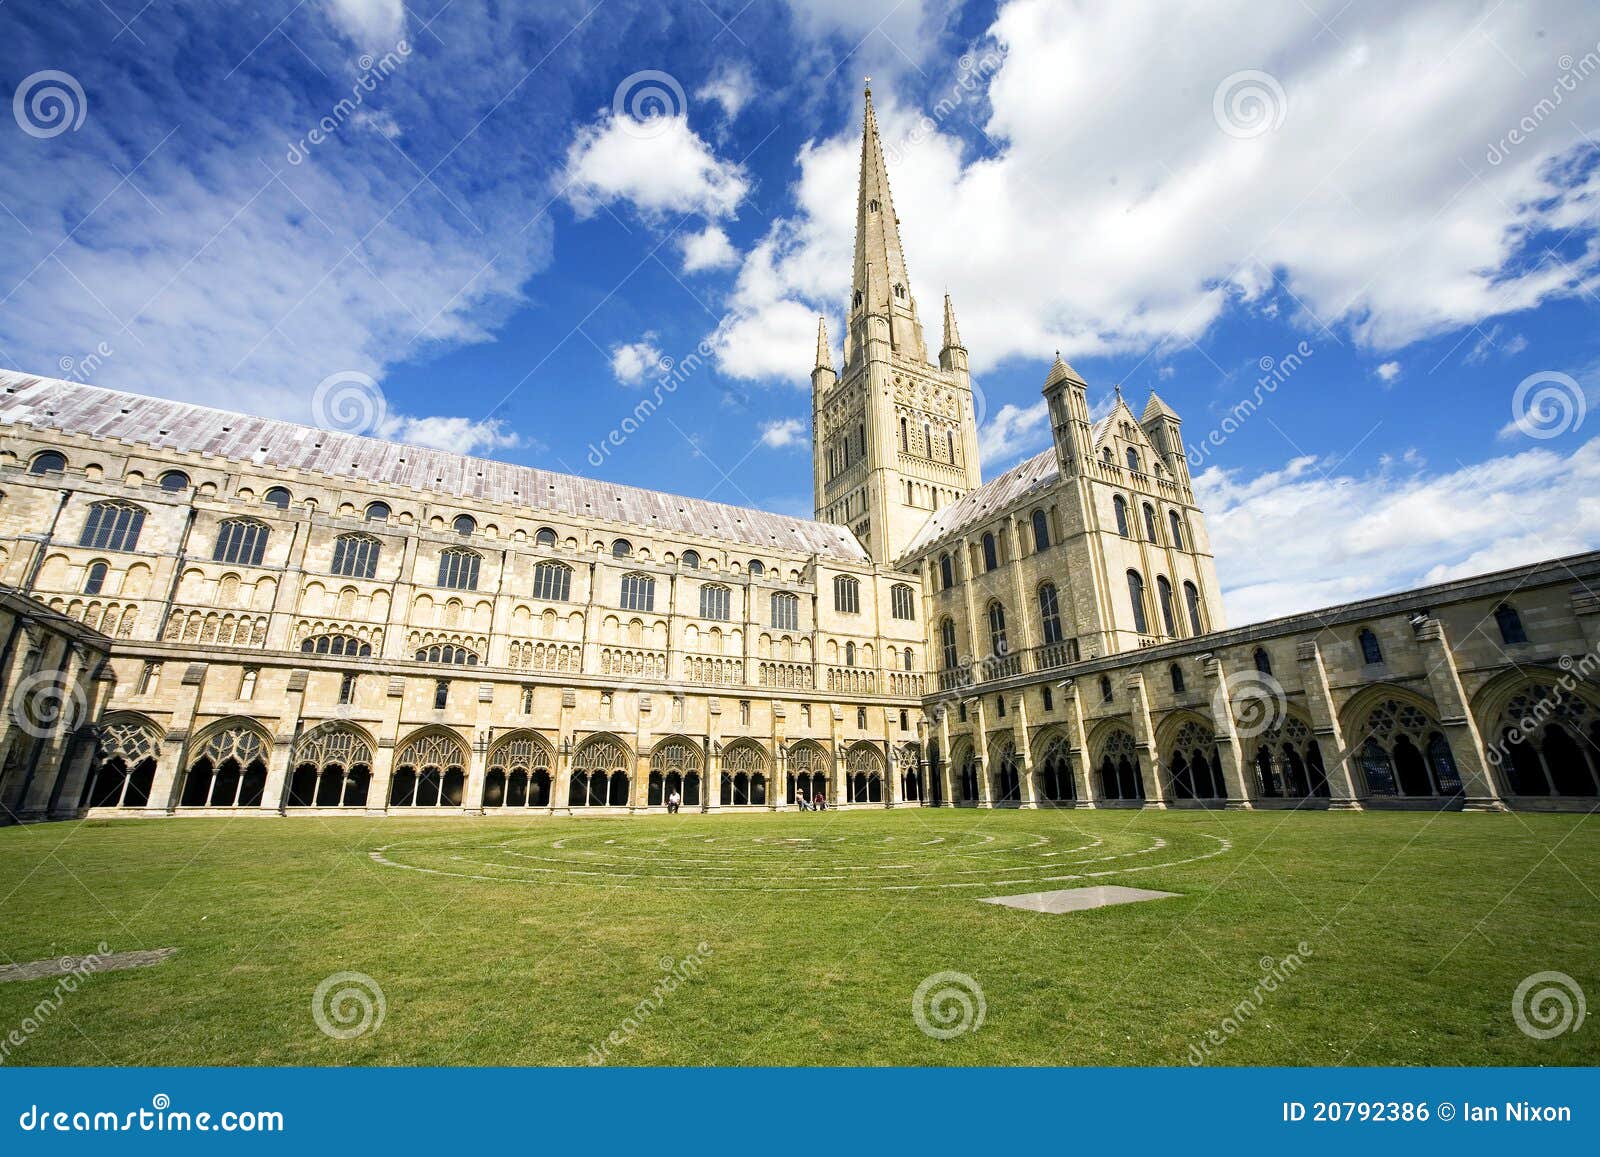 norwich cathedral